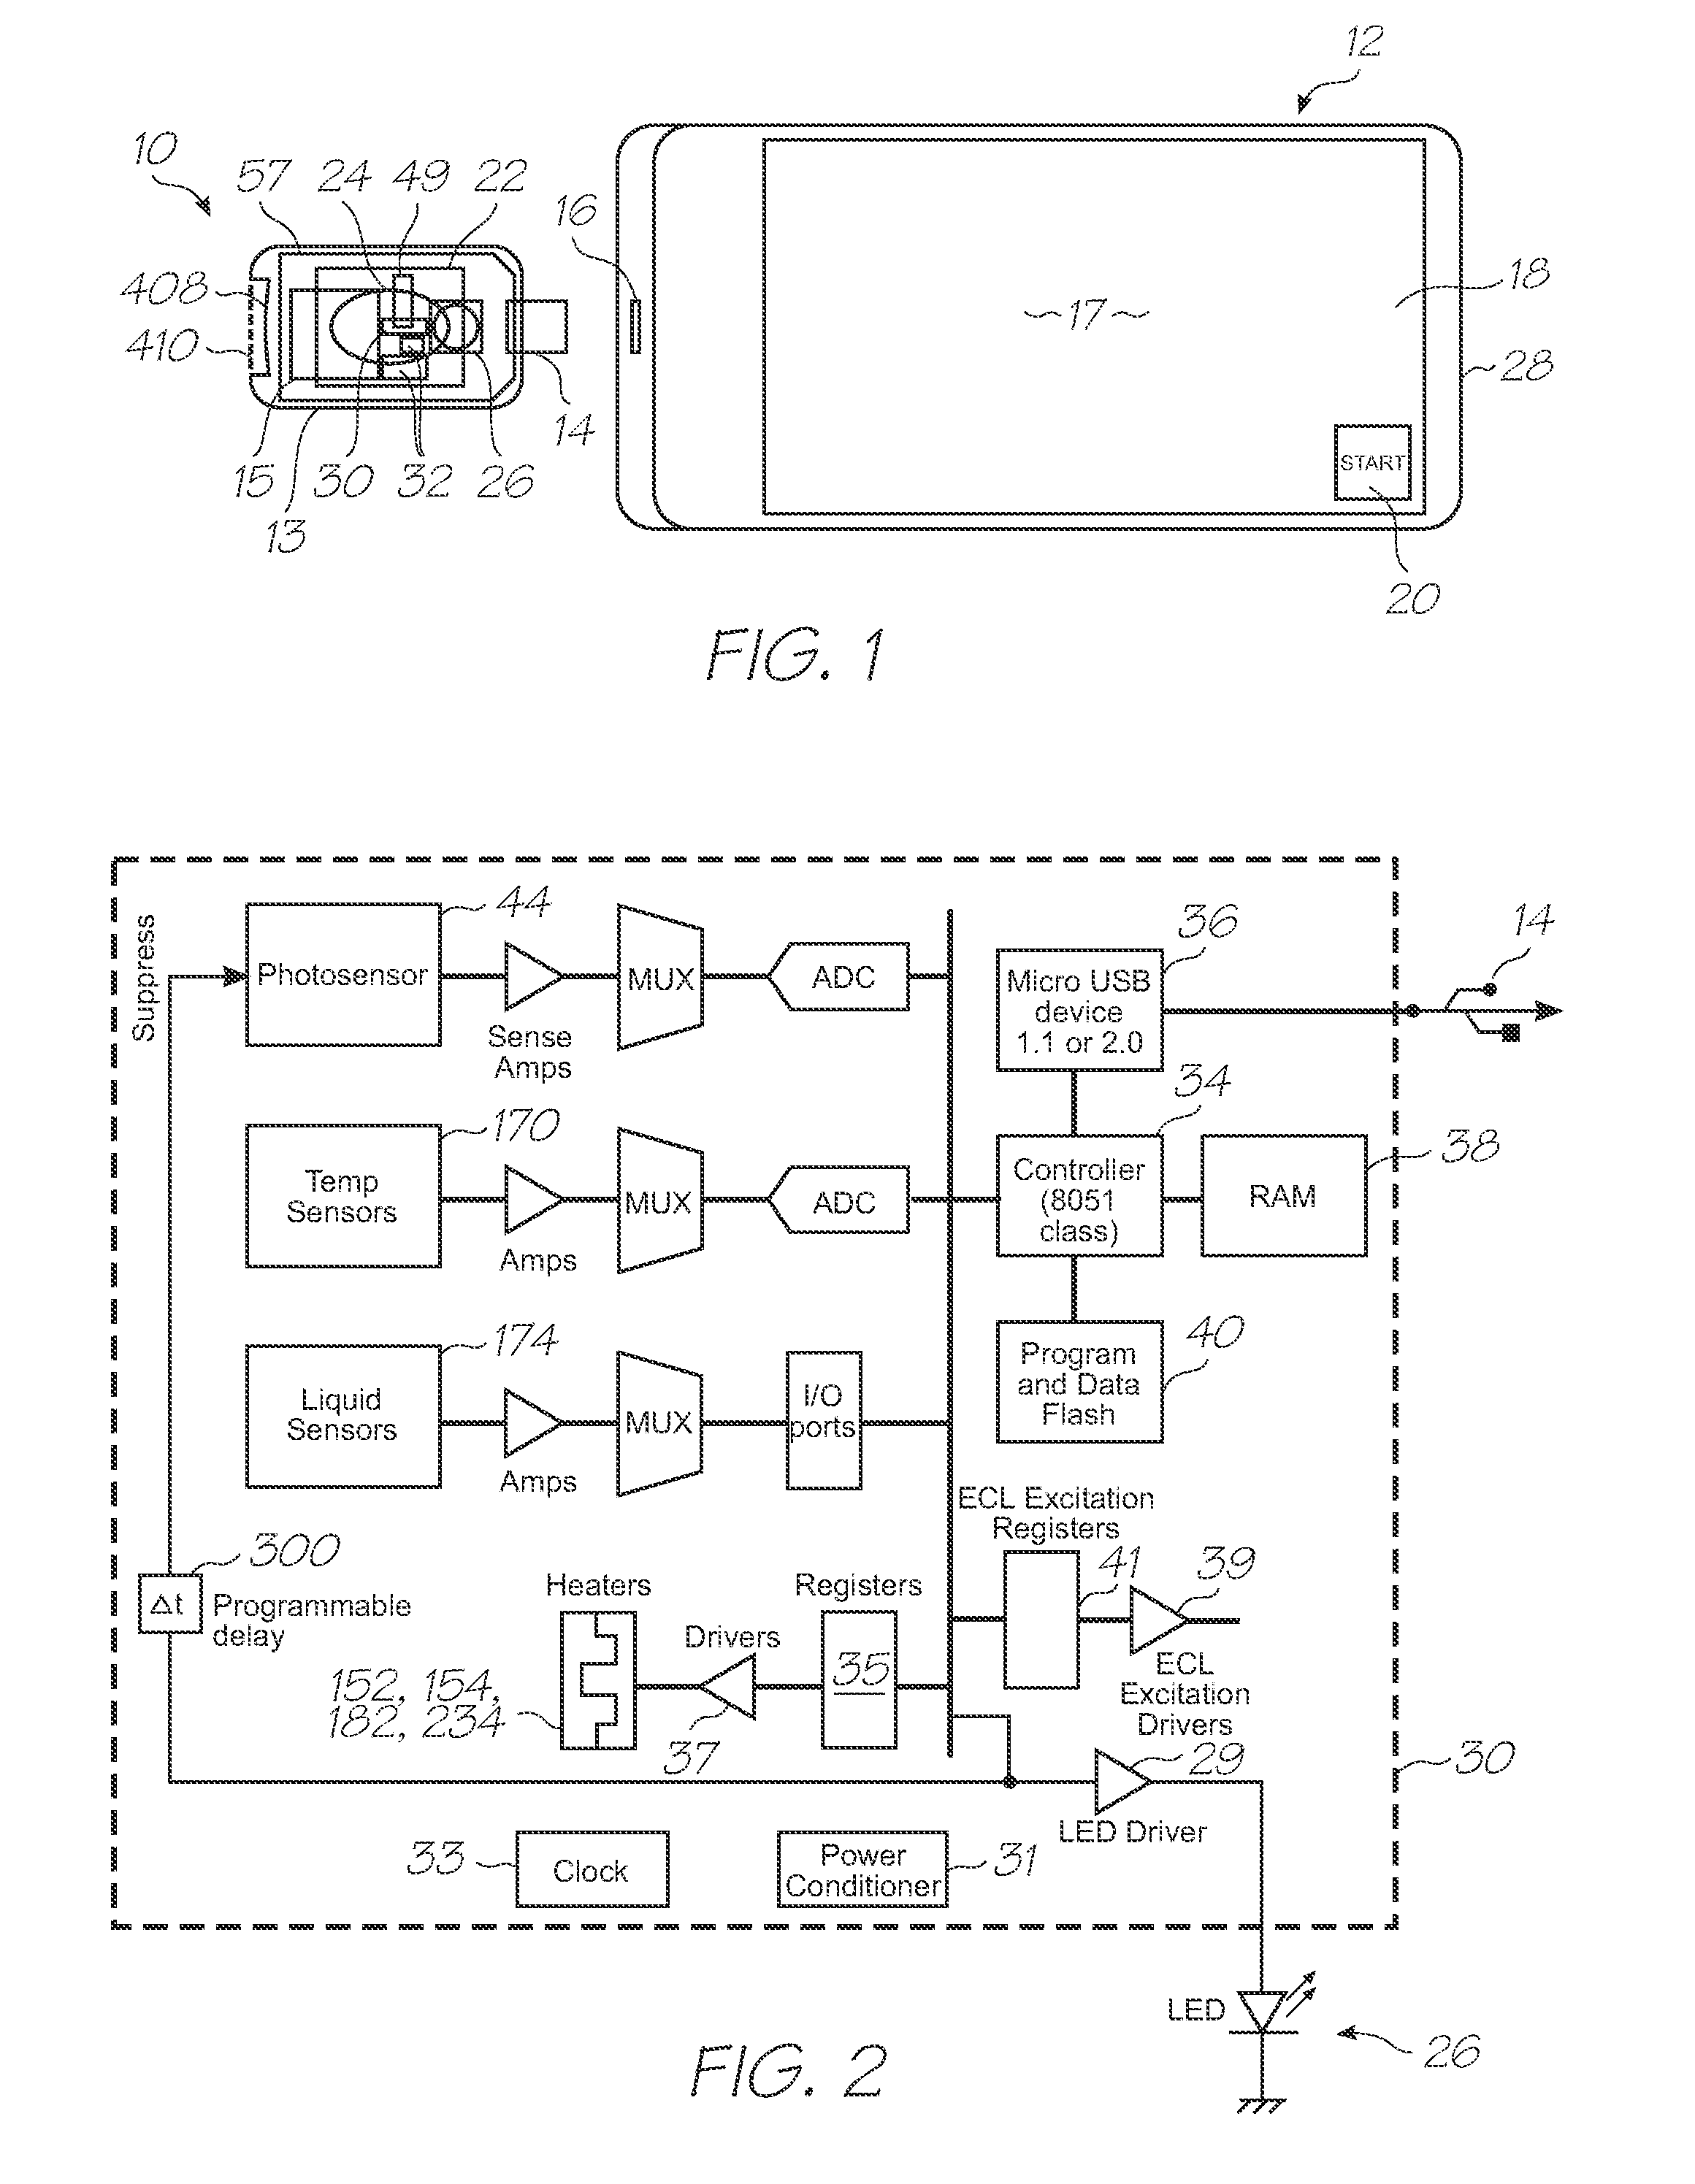 Loc device for detecting target nucleic acid sequences using hybridization chamber array and negative control chamber containing probes without electrochemiluminescent reporter